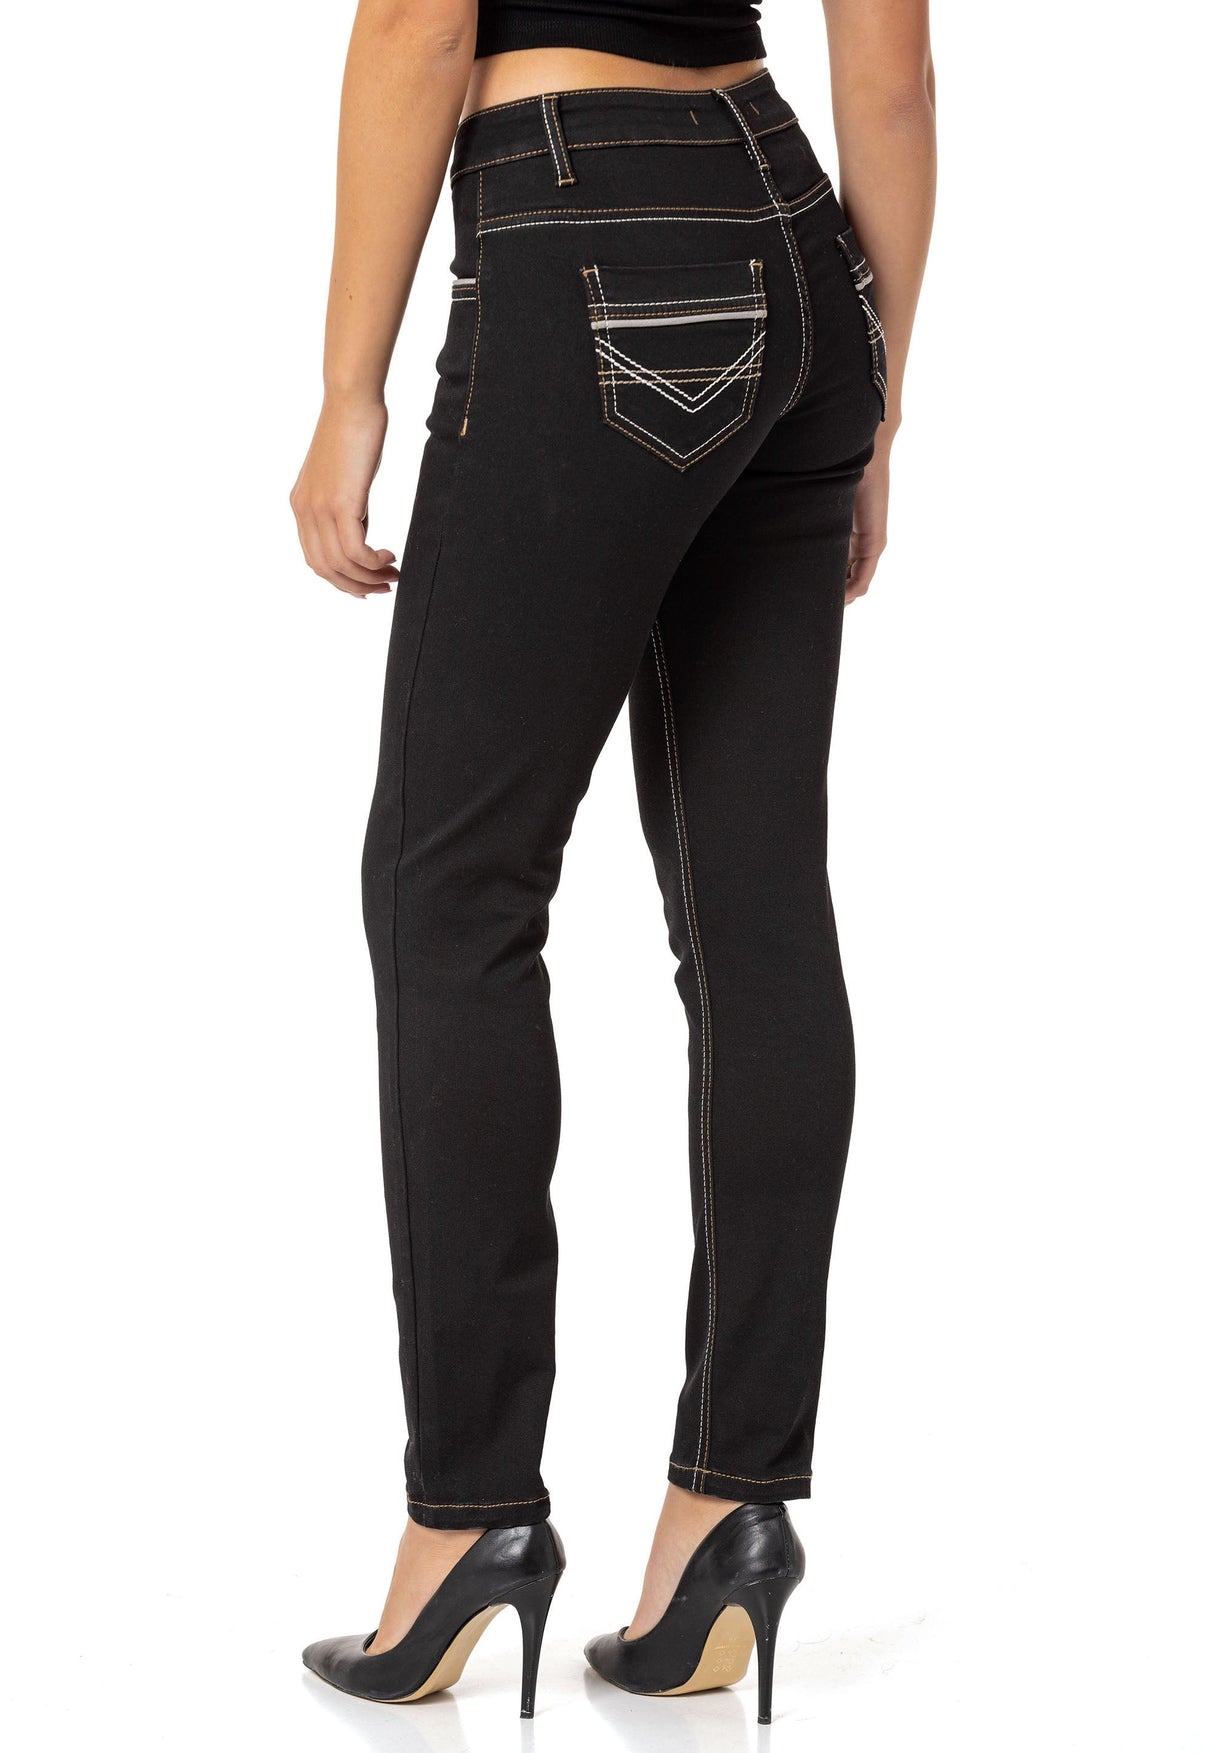 WD256 Women's slim fit jeans with embroidered pockets in slim fit